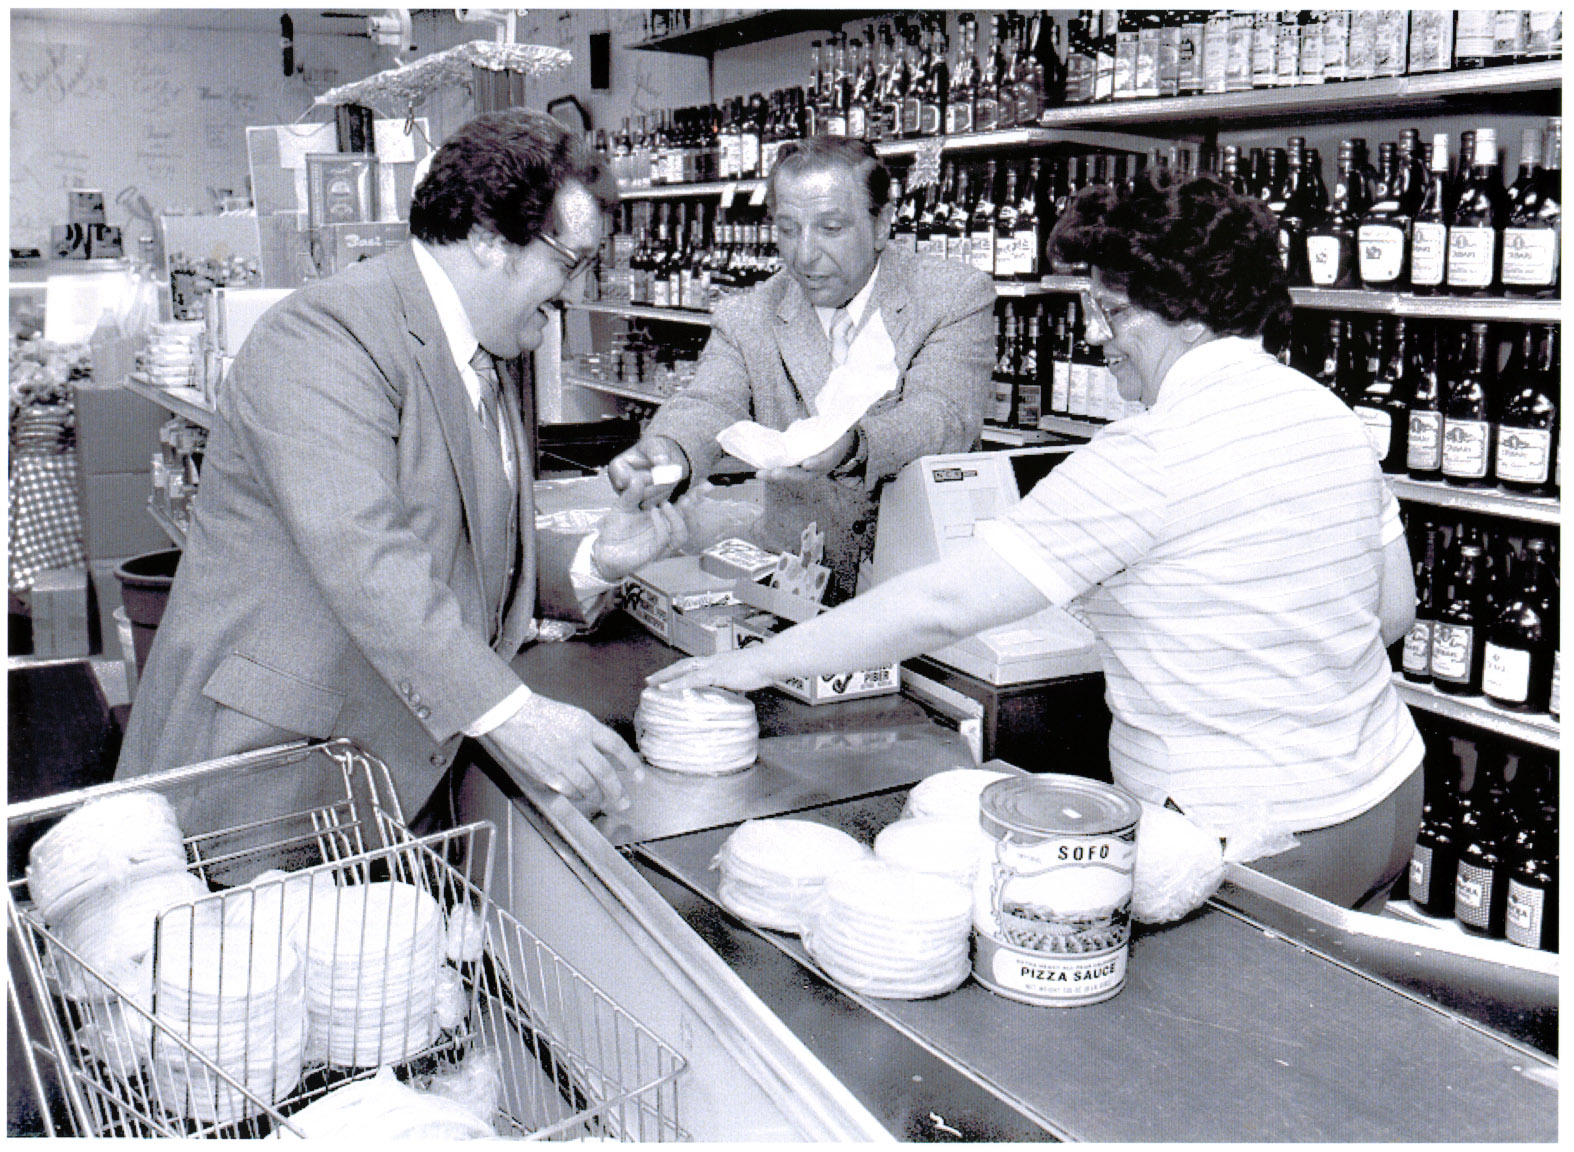 Joe Sofo and his sister Connie serving a customer